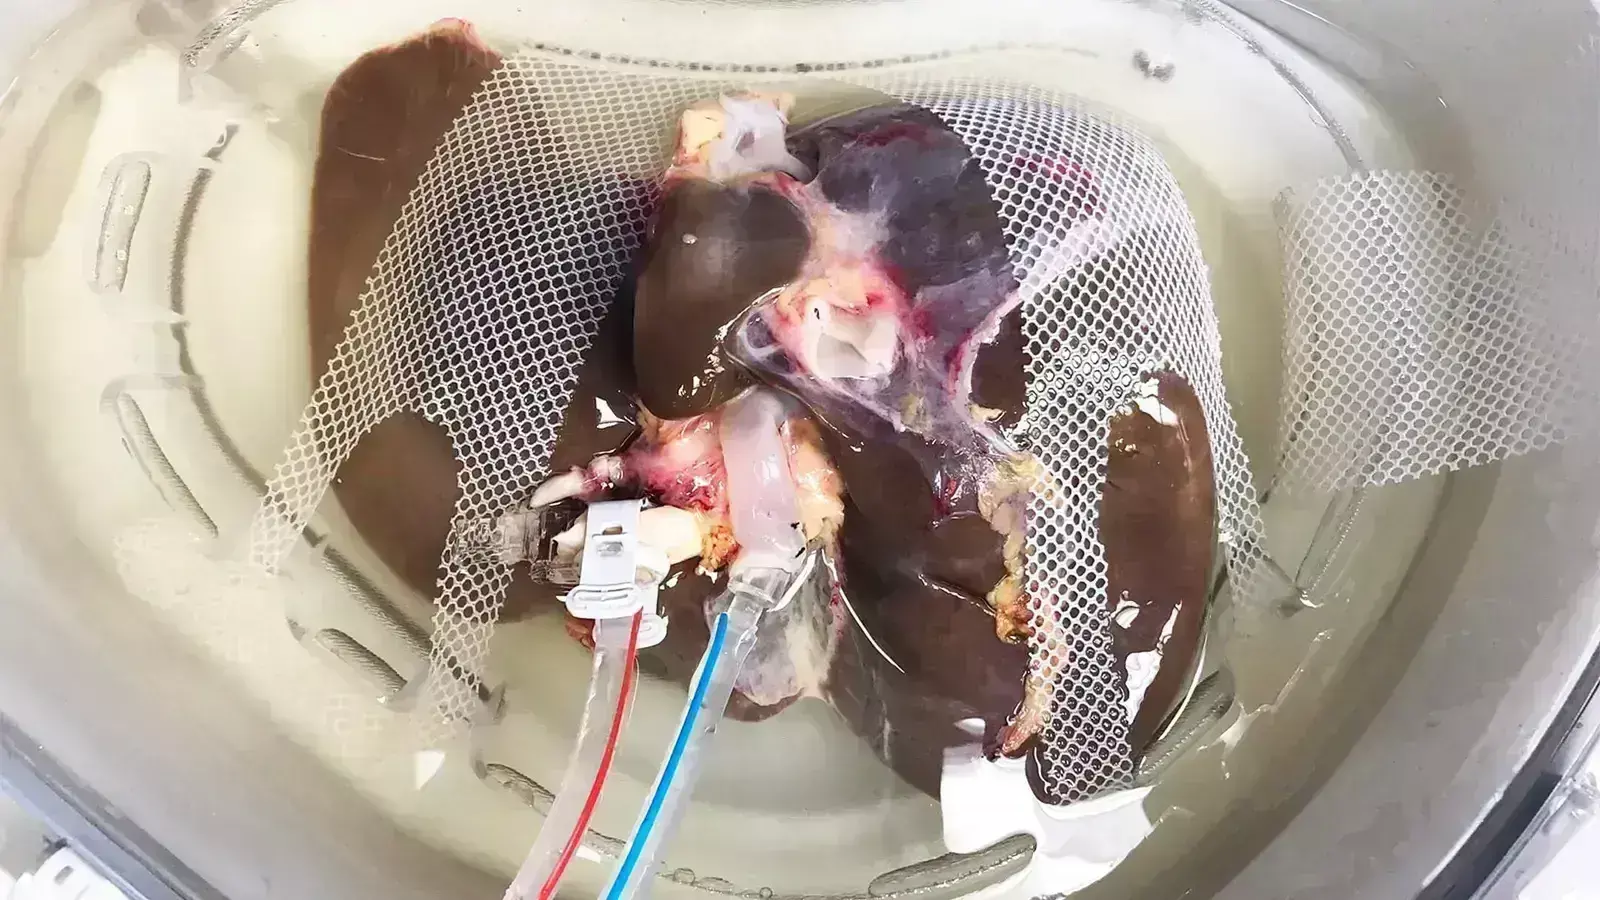 Dynamic organ perfusion techniques tied to less organ rejection after liver transplantation compared to static cold storage